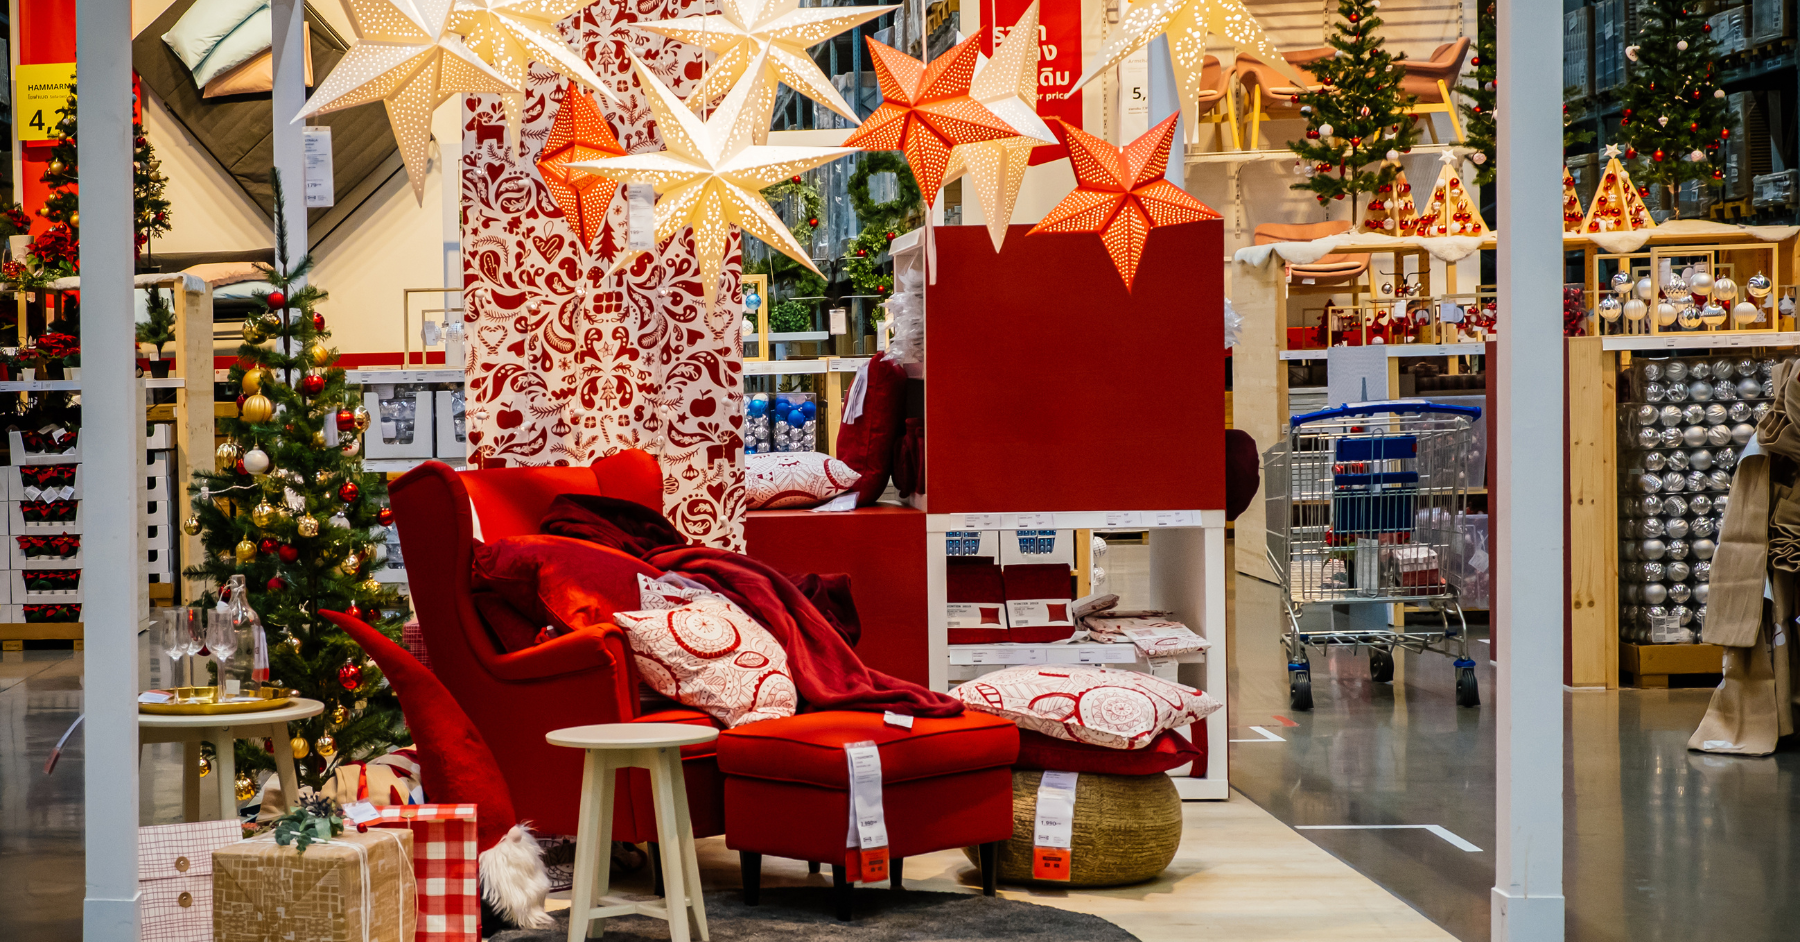 How To Make Gift Shopping In Your Store Enticing